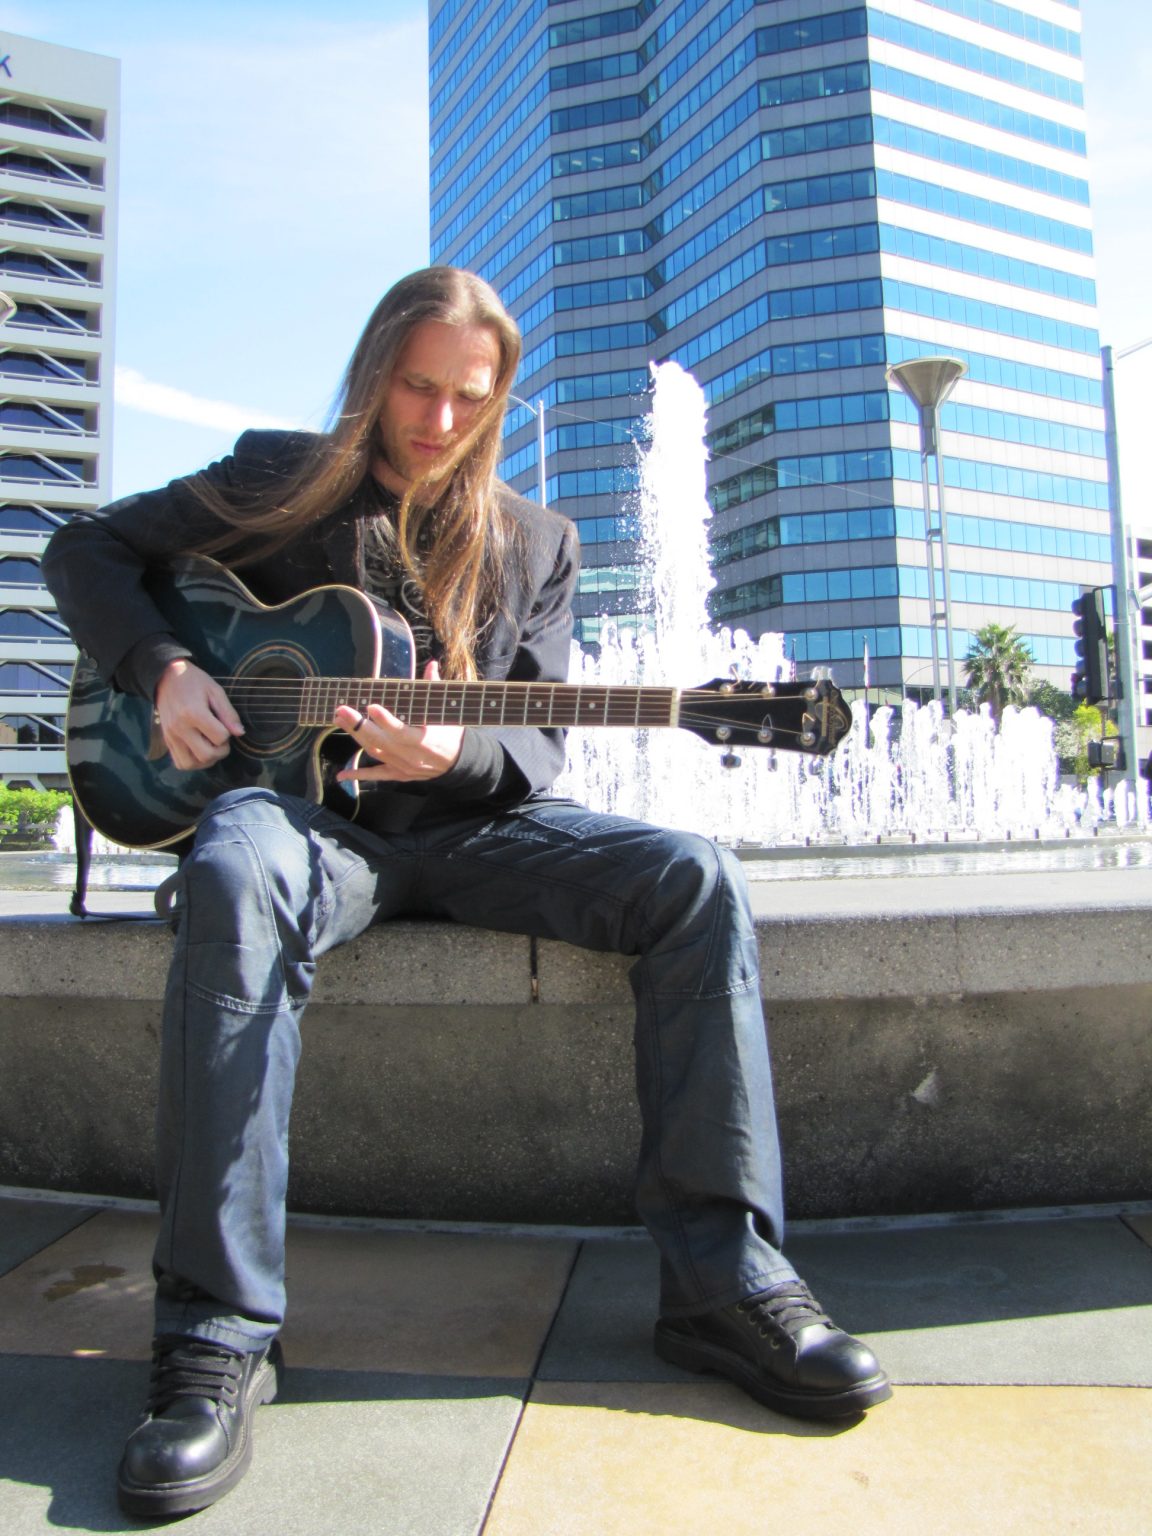 Jason Rathyen guitar and music instructor and performer